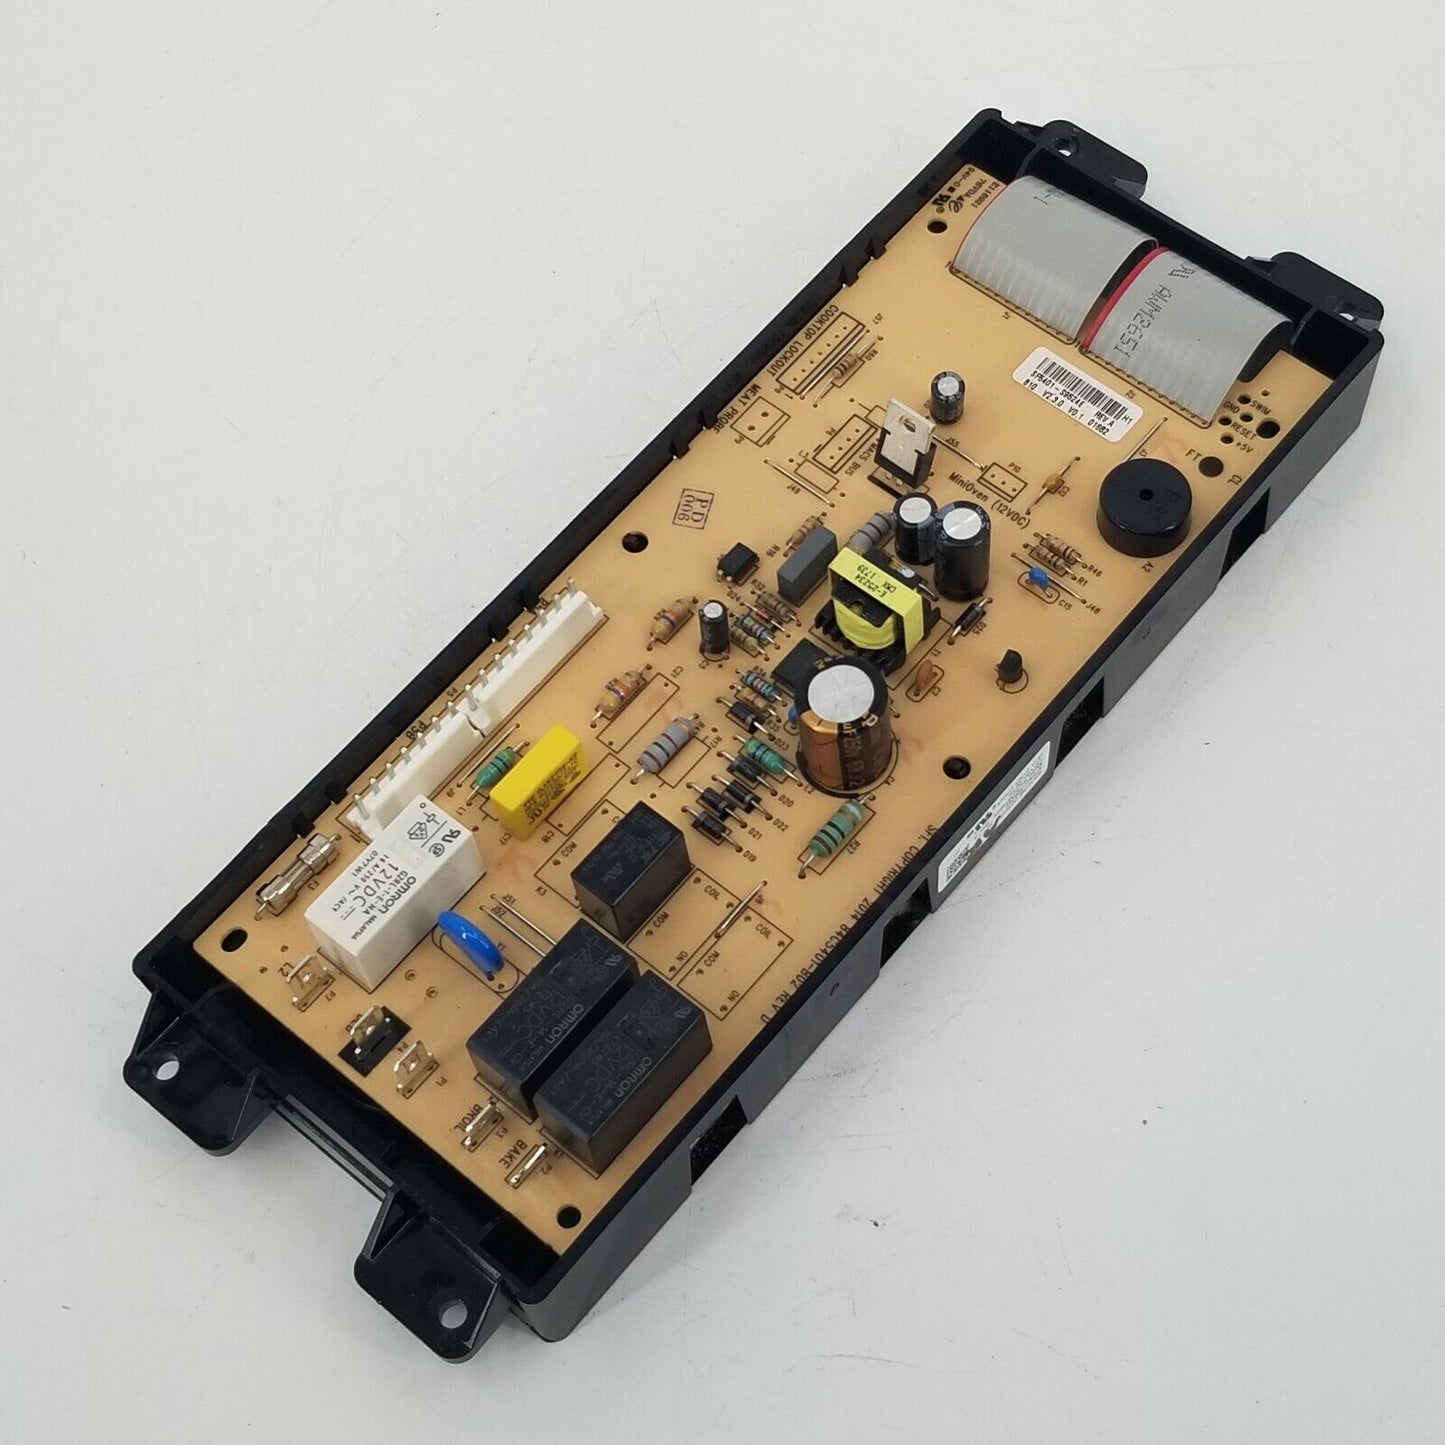 OEM Replacement for Frigidaire Range Control Board A03619524